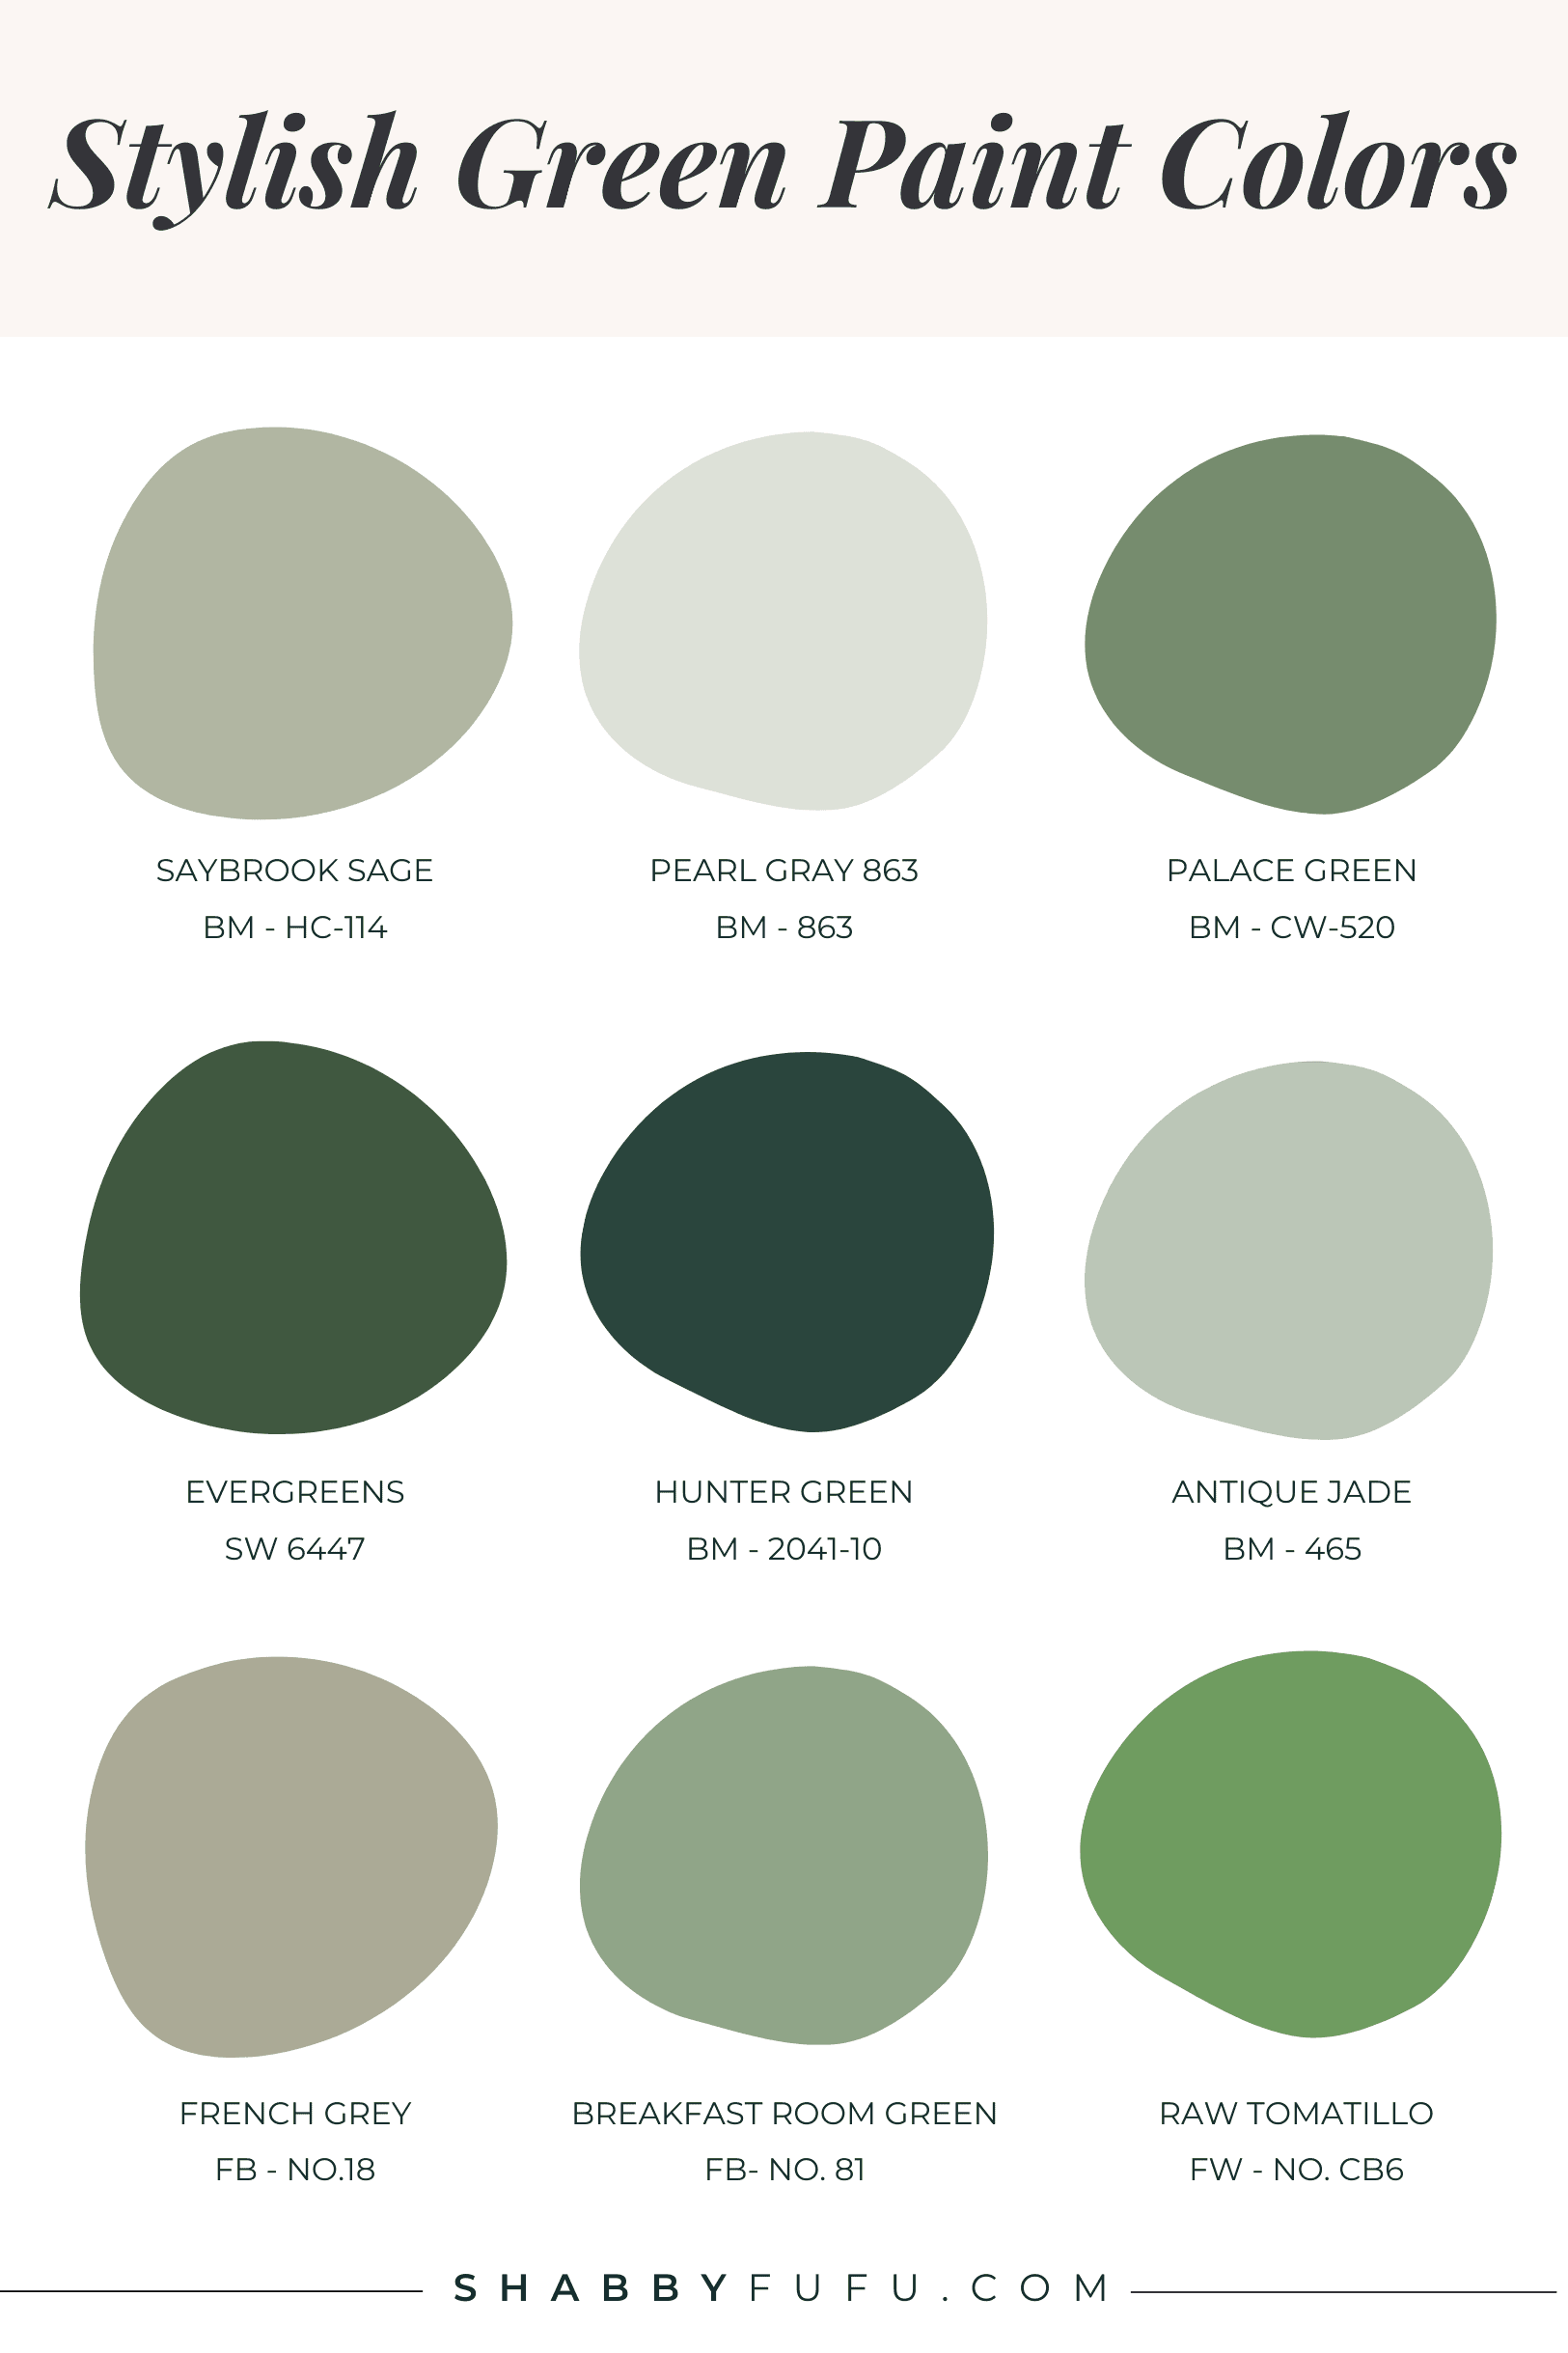 Infographic of green paint colors for interiors